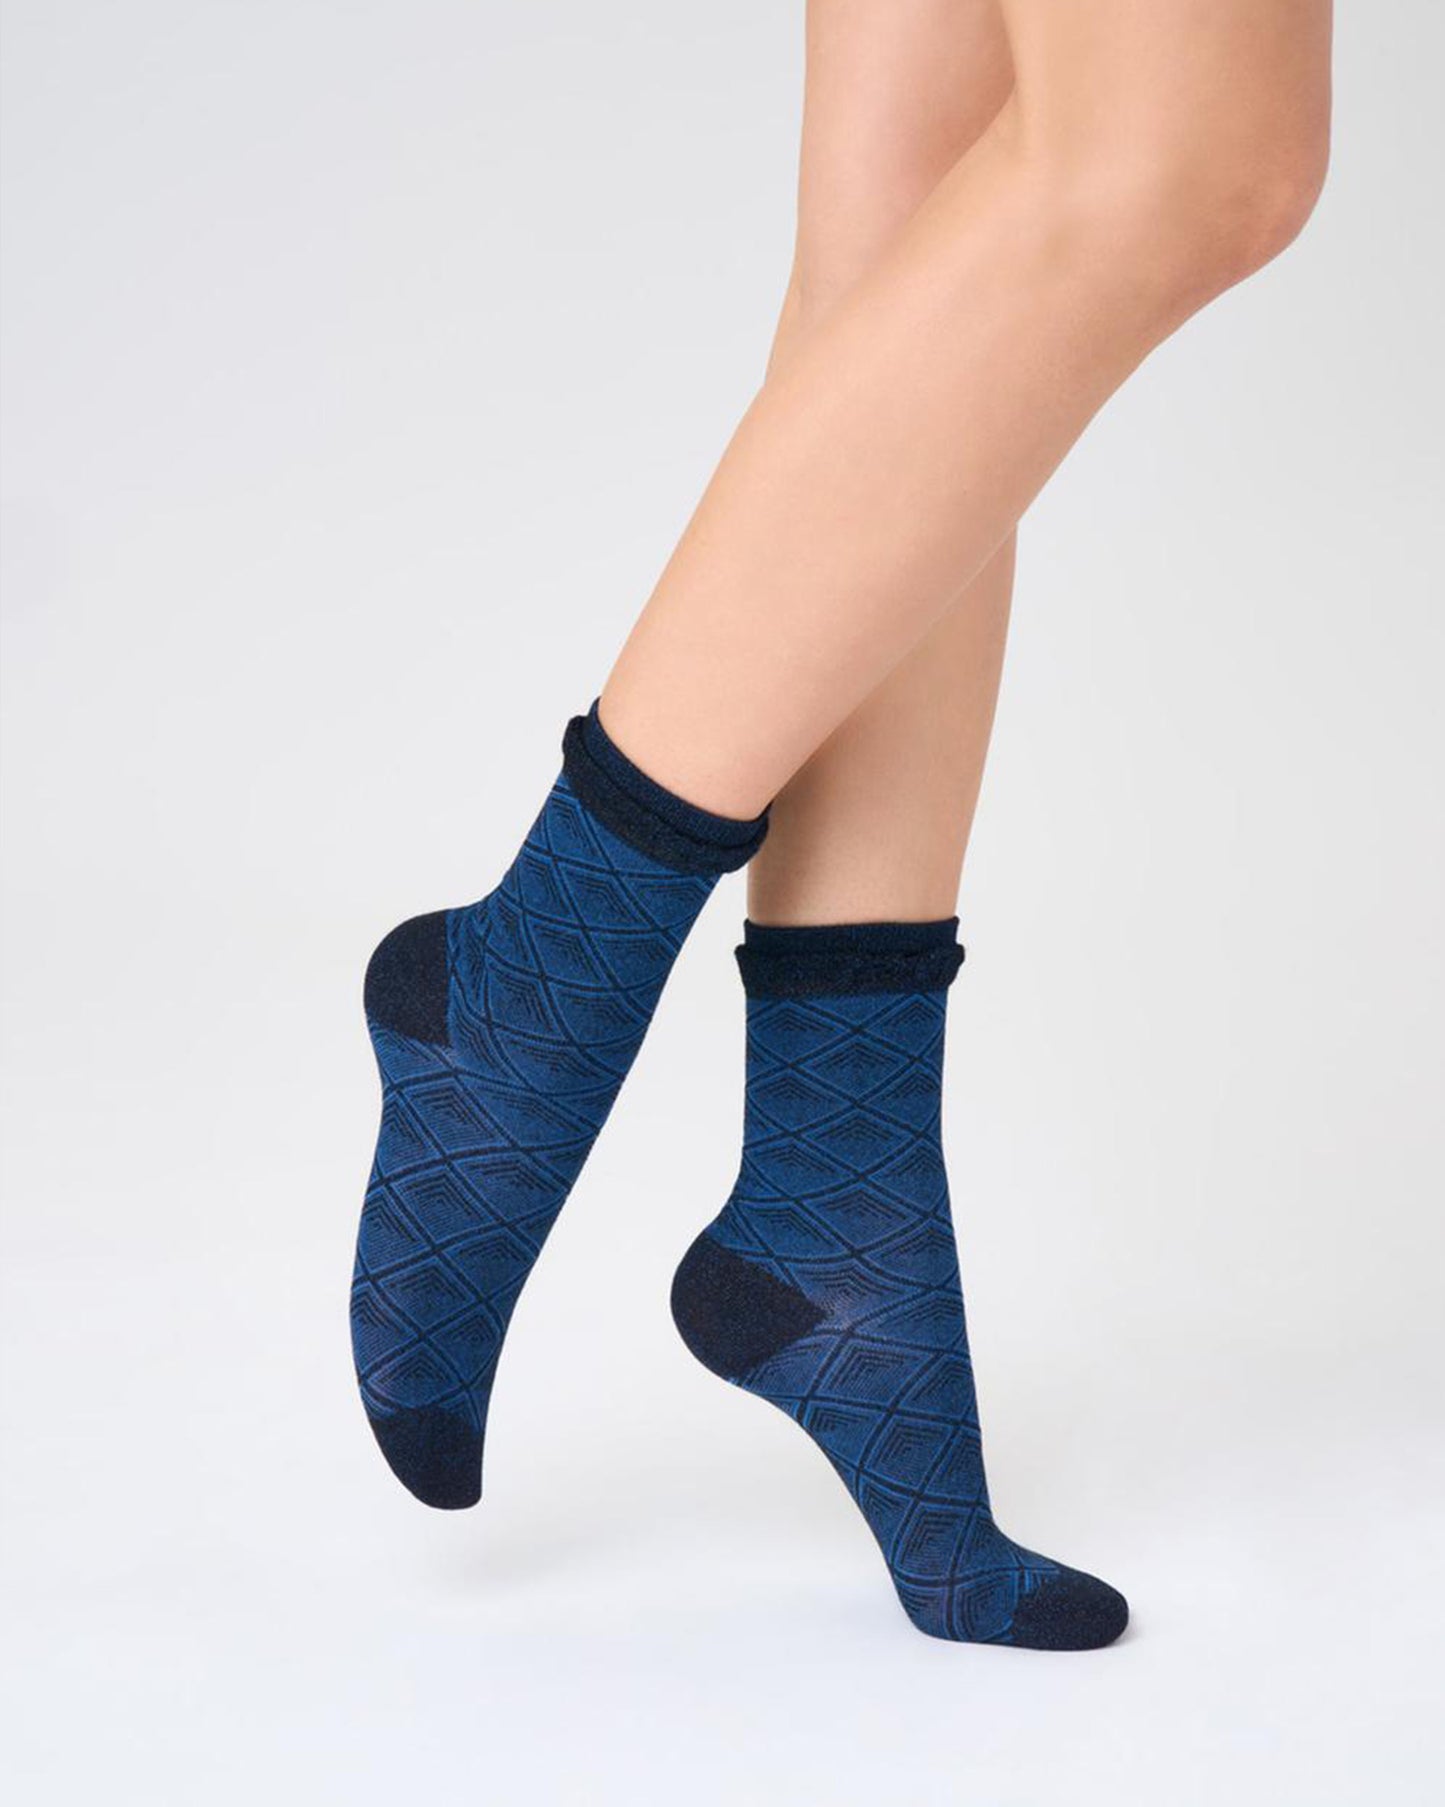 SiSi Geometrico Calzino - Light grey fashion ankle socks with a black diamond pattern, sparkly silver lamé knitted through a small frill cuff.